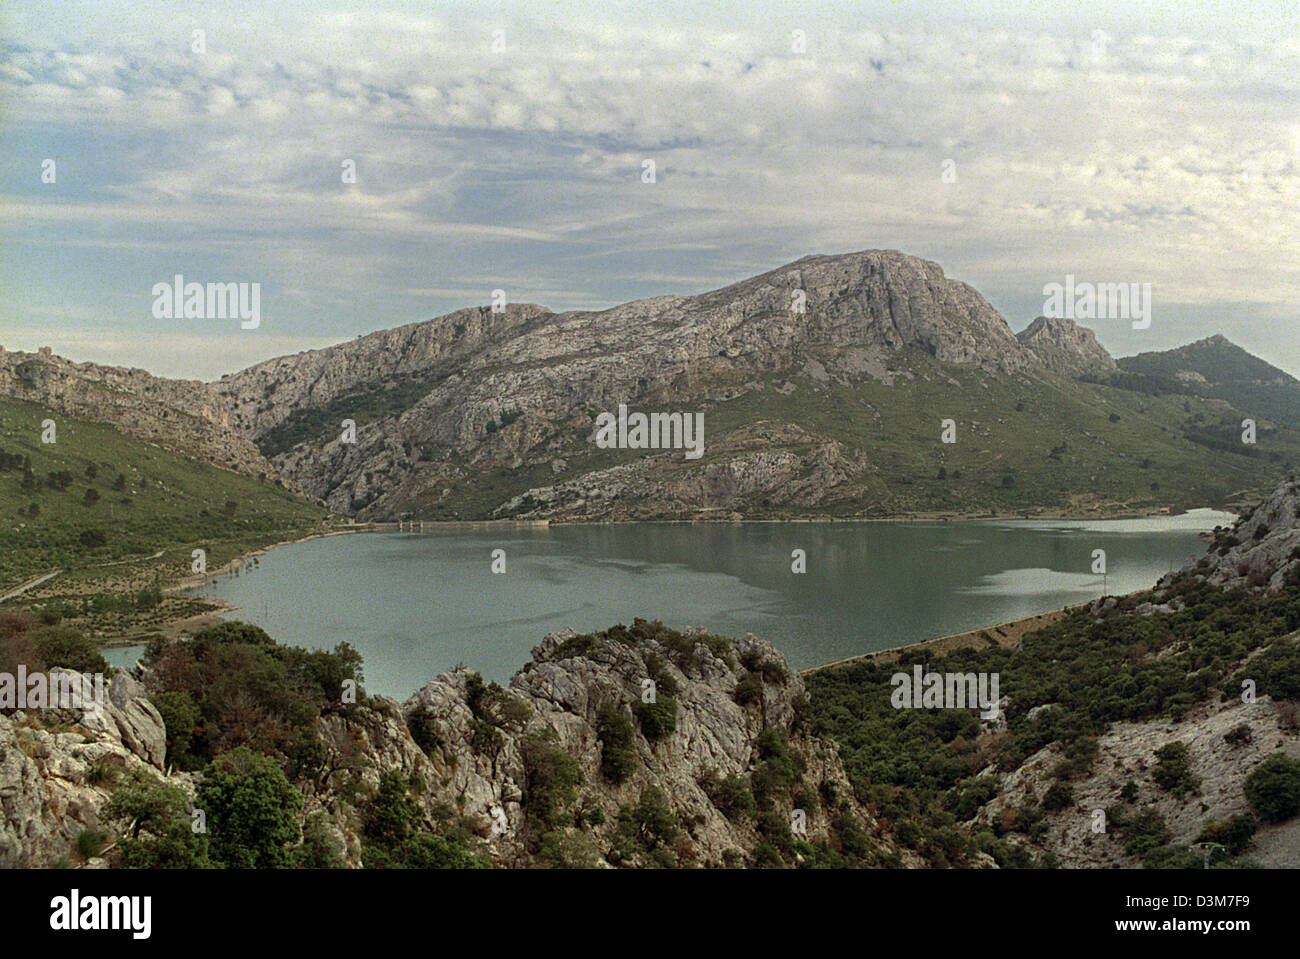 (dpa file) - The photo shows the Embalse de Cuber lake in the Serra de Tramuntana mountain range, Spain, 29 June 2004. The Embalse de Cuber and the neighbouring reservoir Gorg Blau, which are connected, are supposed to solve Palma's drinking water problems. Photo: Thorsten Lang Stock Photo